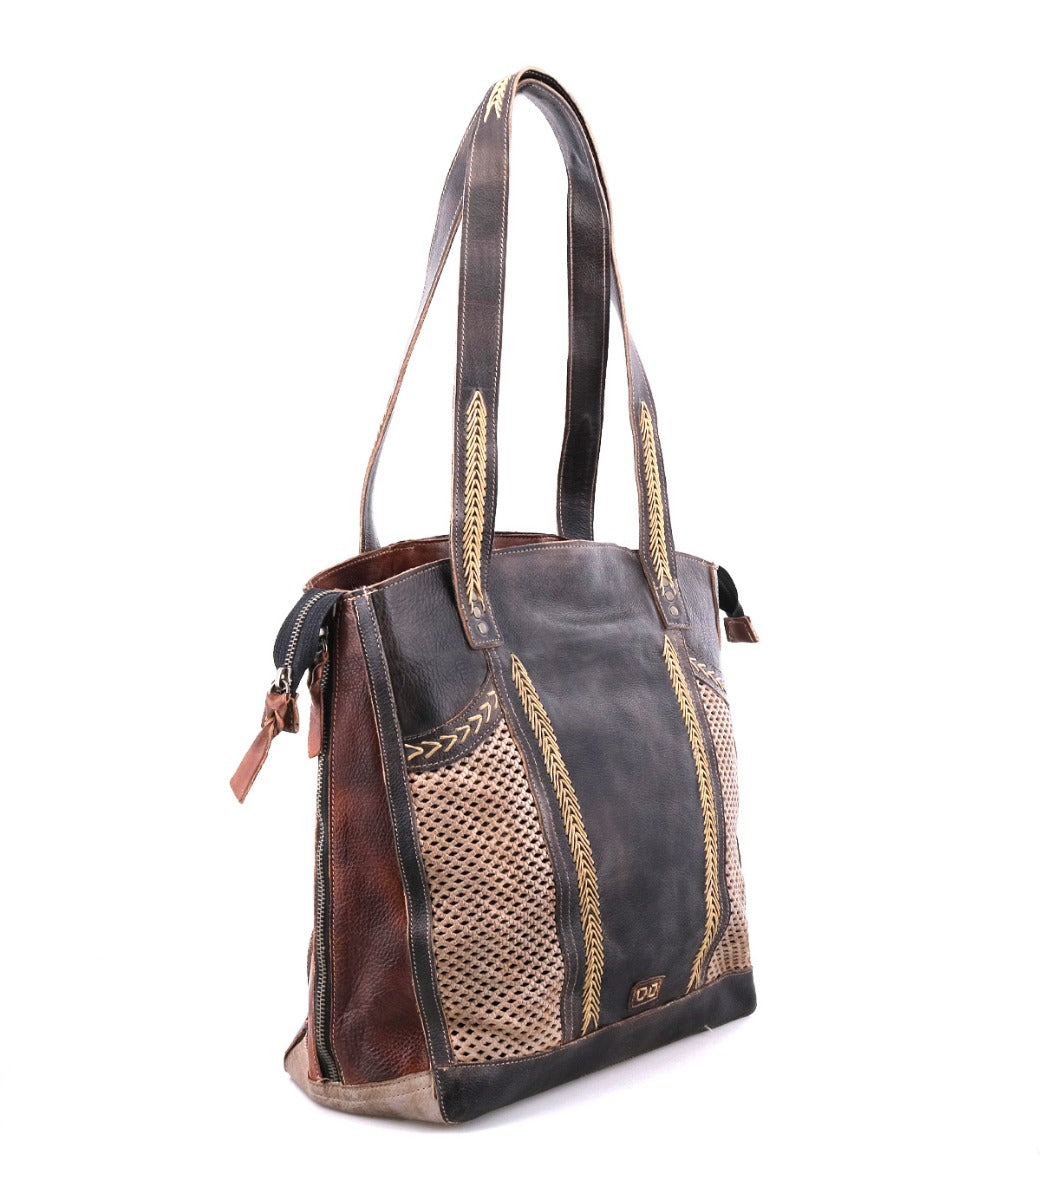 A brown and tan leather Amelie tote bag by Bed Stu.